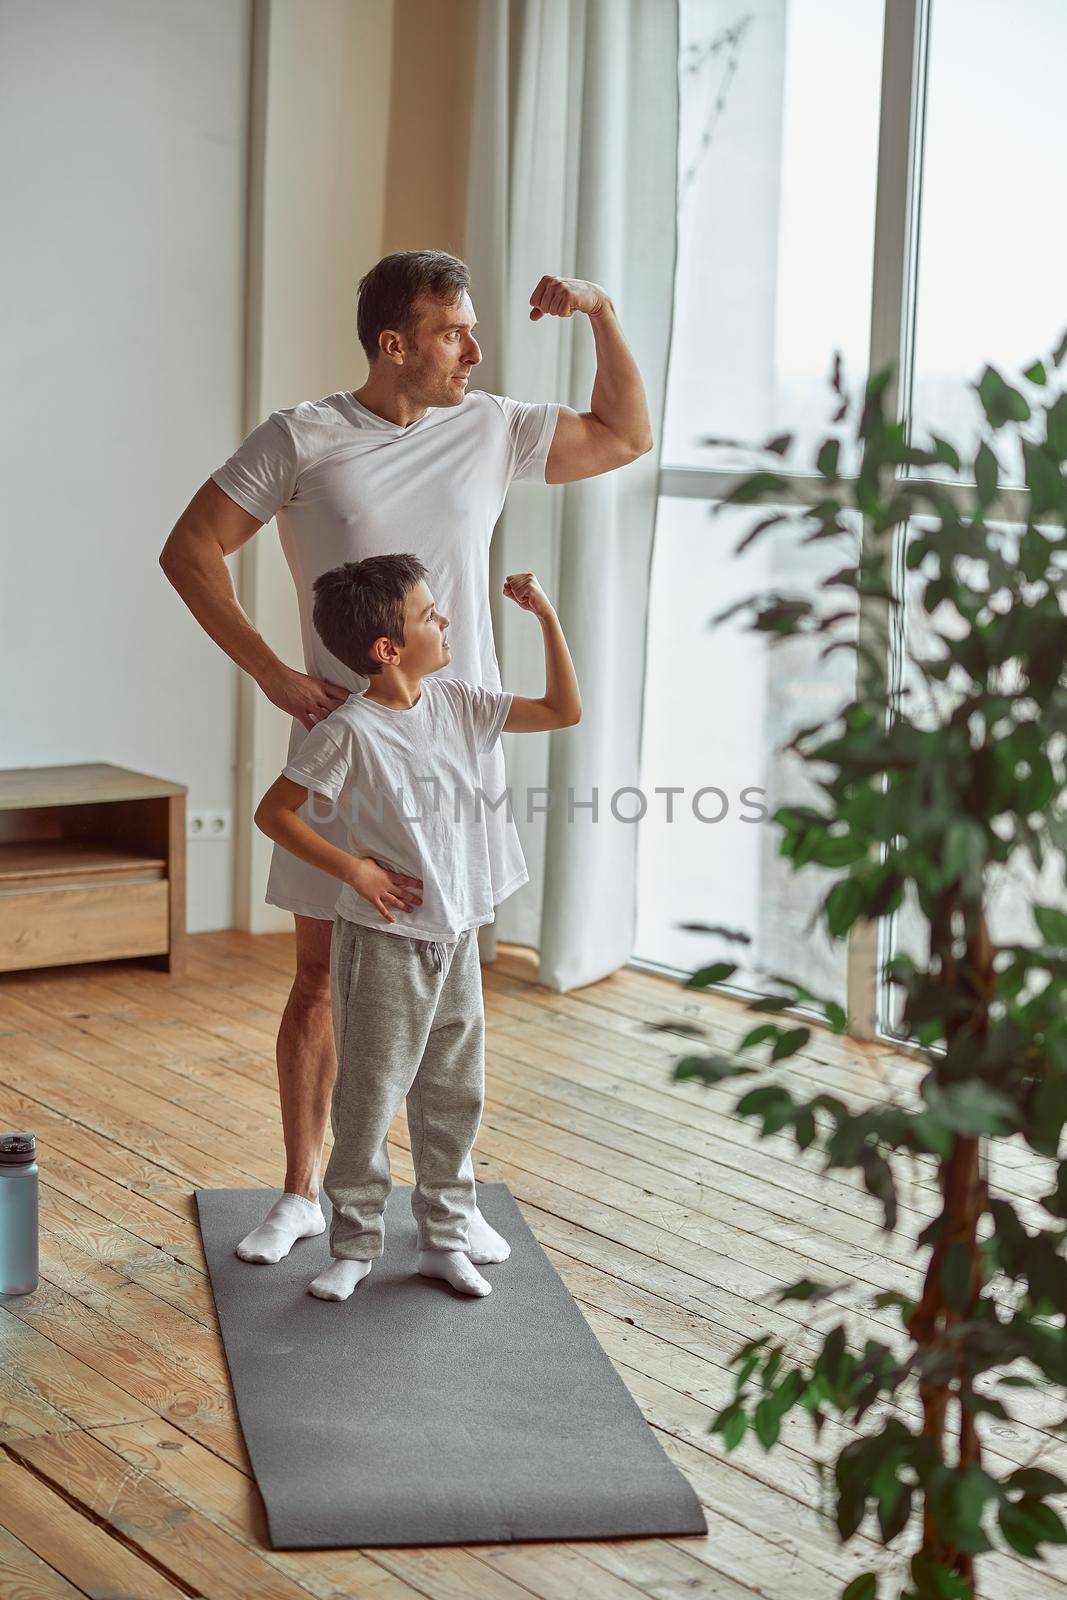 Sporty father and son demonstrating muscles indoors by Yaroslav_astakhov